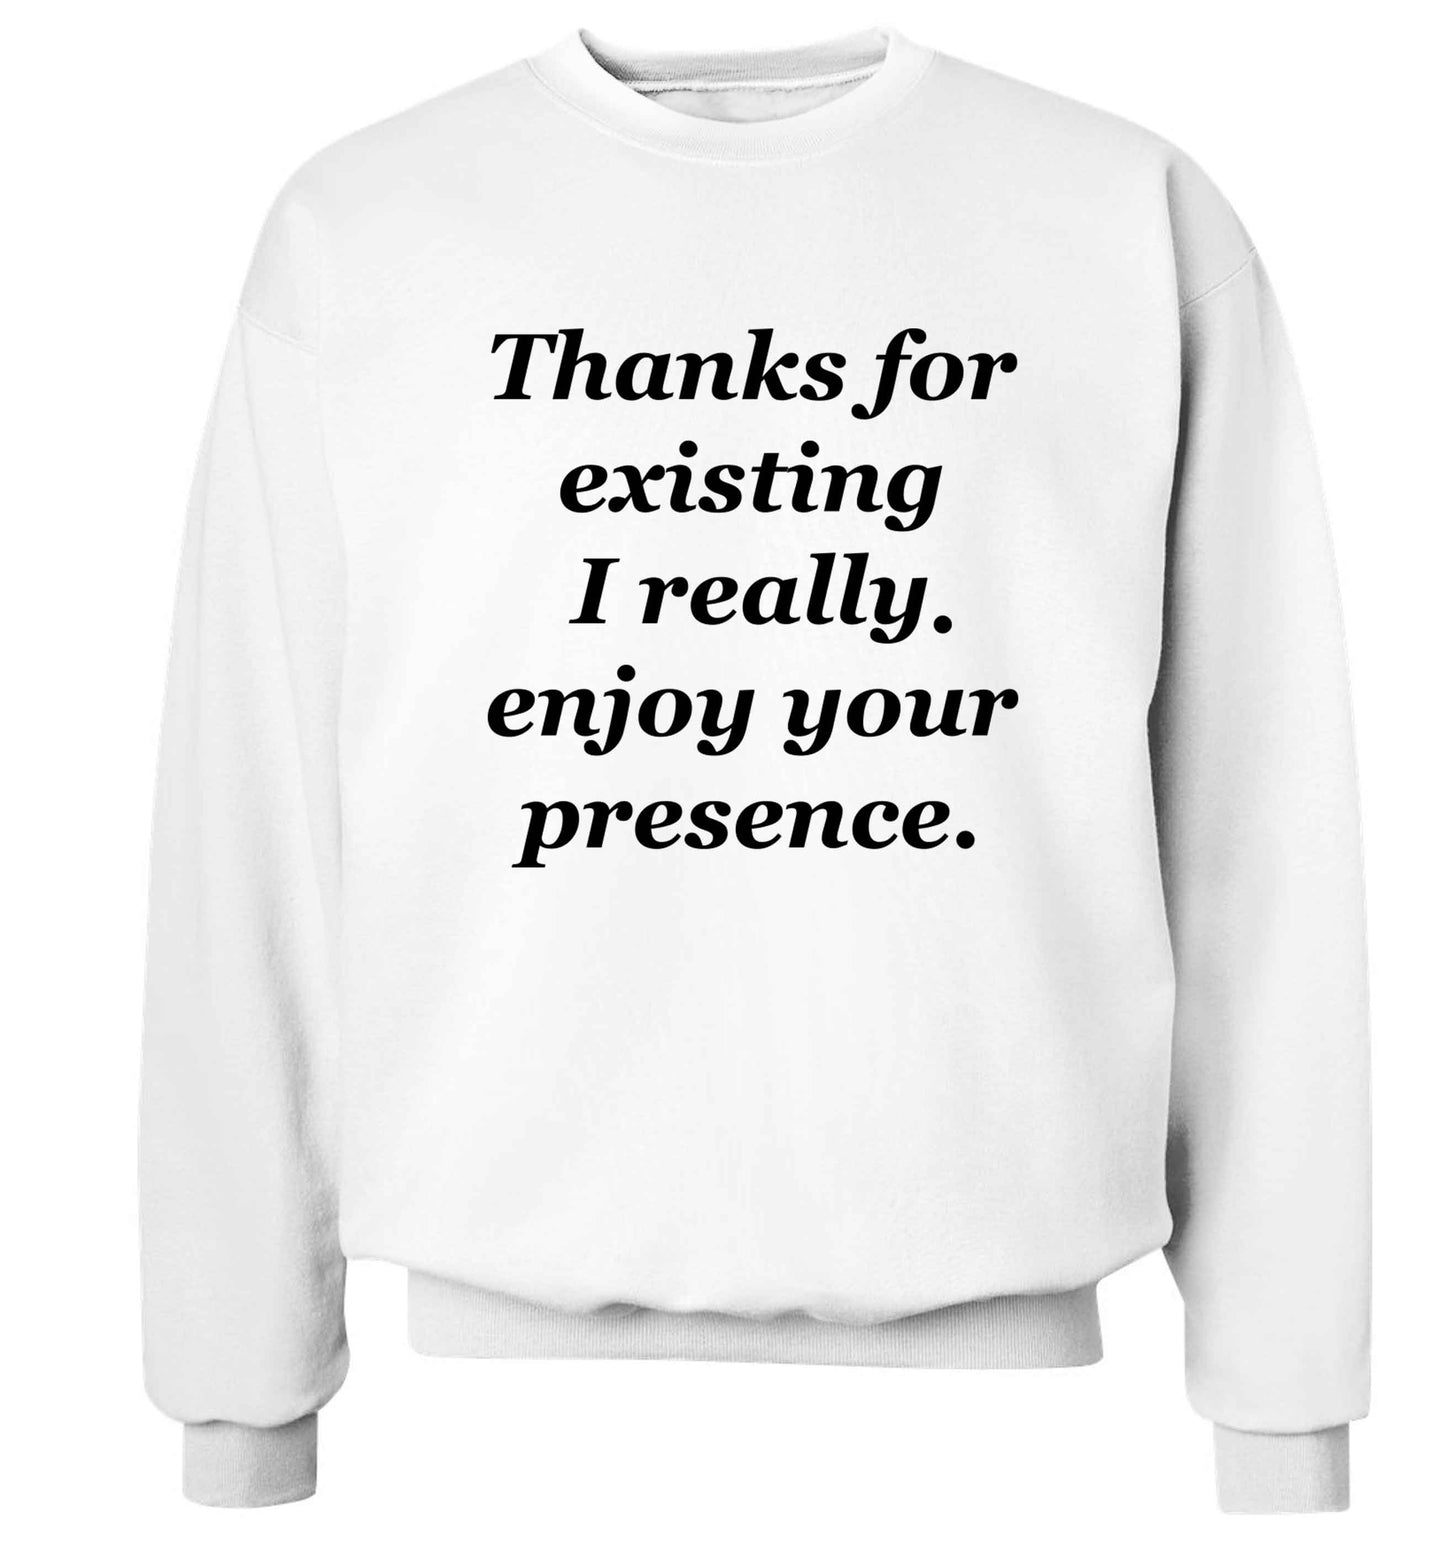 Thanks for existing I really enjoy your presence Adult's unisex white Sweater 2XL